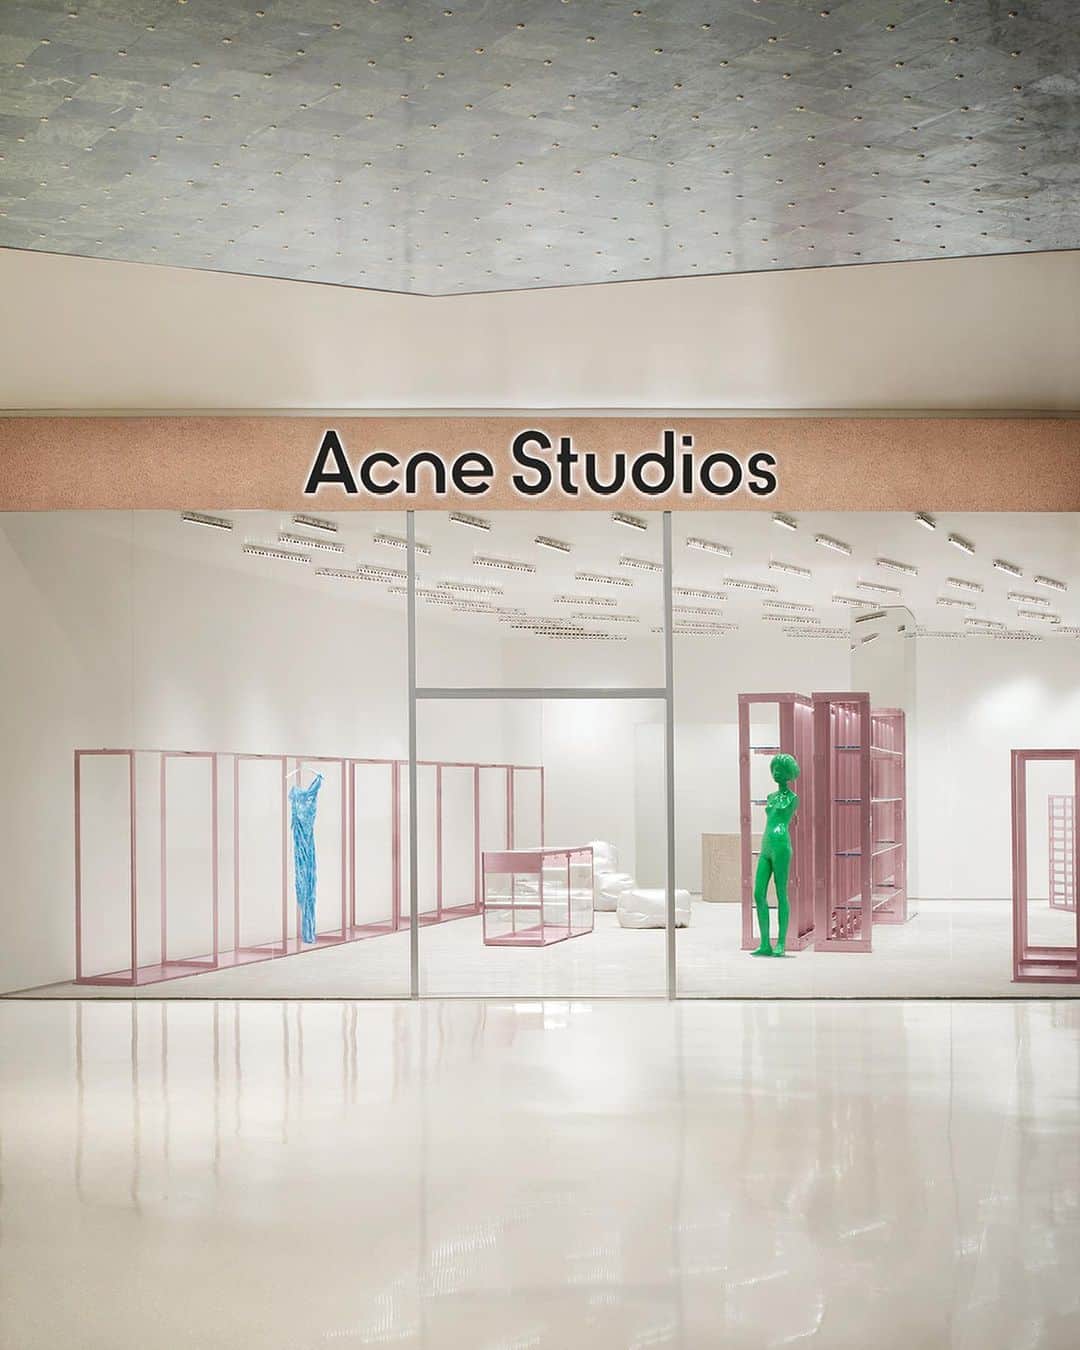 Acne Studiosのインスタグラム：「Welcome to Las Vegas! 💎 #AcneStudios has arrived. Discover our new store at the Shops at Crystals on South Las Vegas Boulevard. Inside, furniture by longtime collaborator #MaxLamb meets mannequins by artist @Daniel_Silver__, all illuminated by @BenoitLalloz’s lights. Launching exclusively to celebrate the opening, the iconic 2021 denim jeans and #Musubi bags covered in shiny crystals, available at the Las Vegas location and online in the United States only.   Acne Studios Las Vegas is now open, come say hi!」